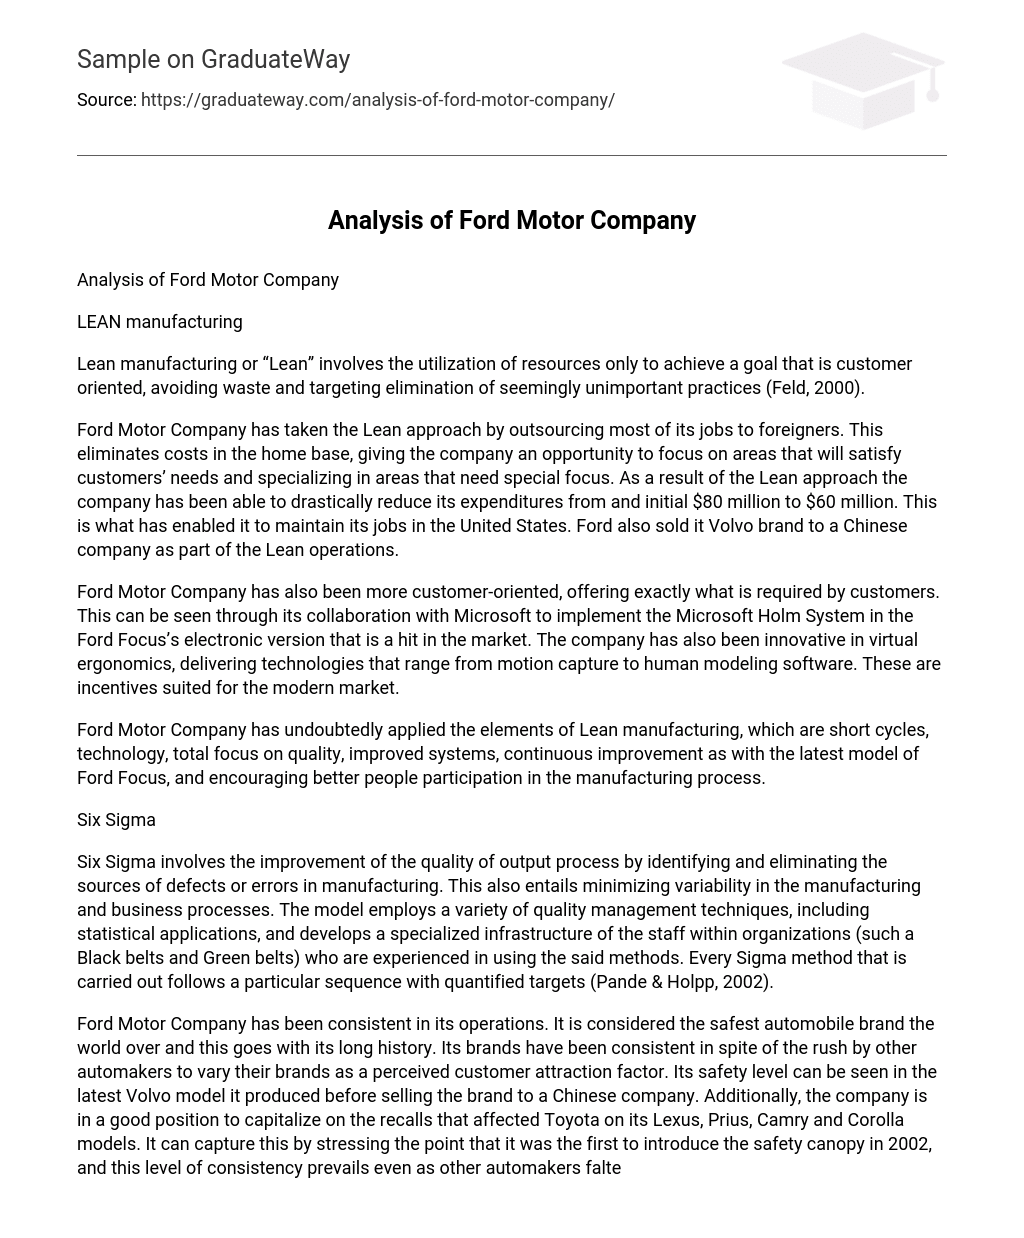 Analysis of Ford Motor Company